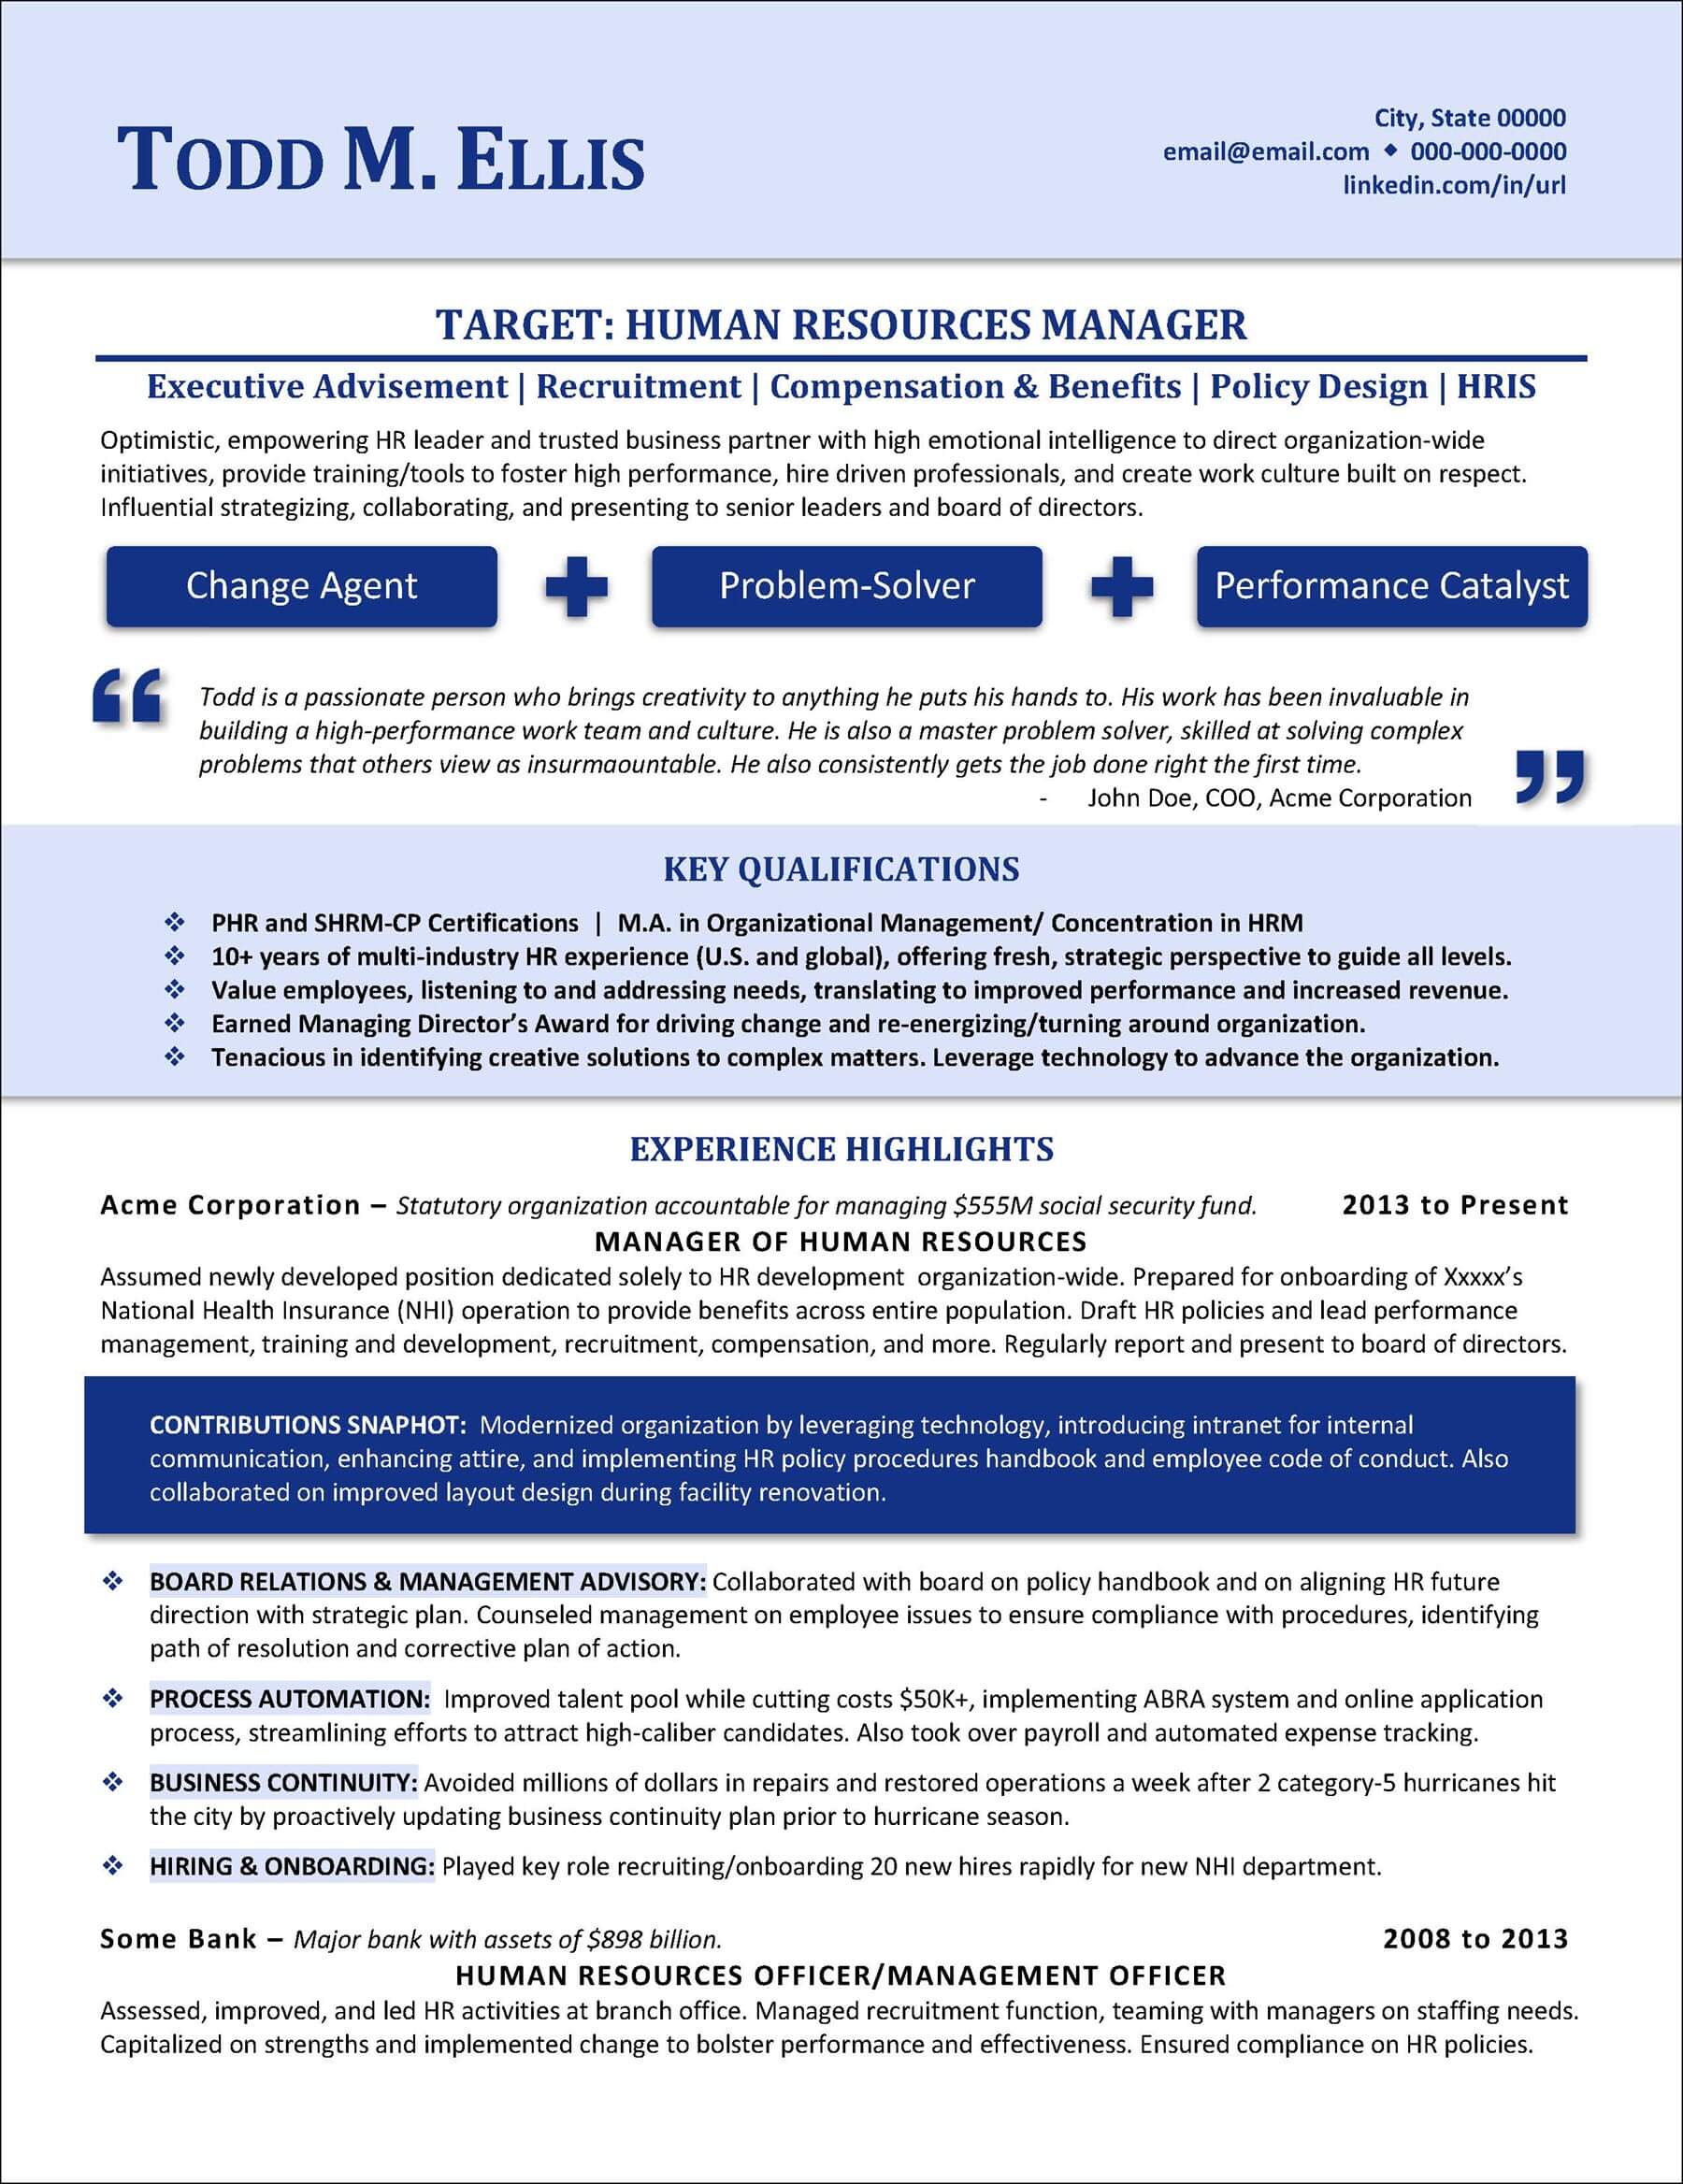 Human Resources Manager Resume Page 1